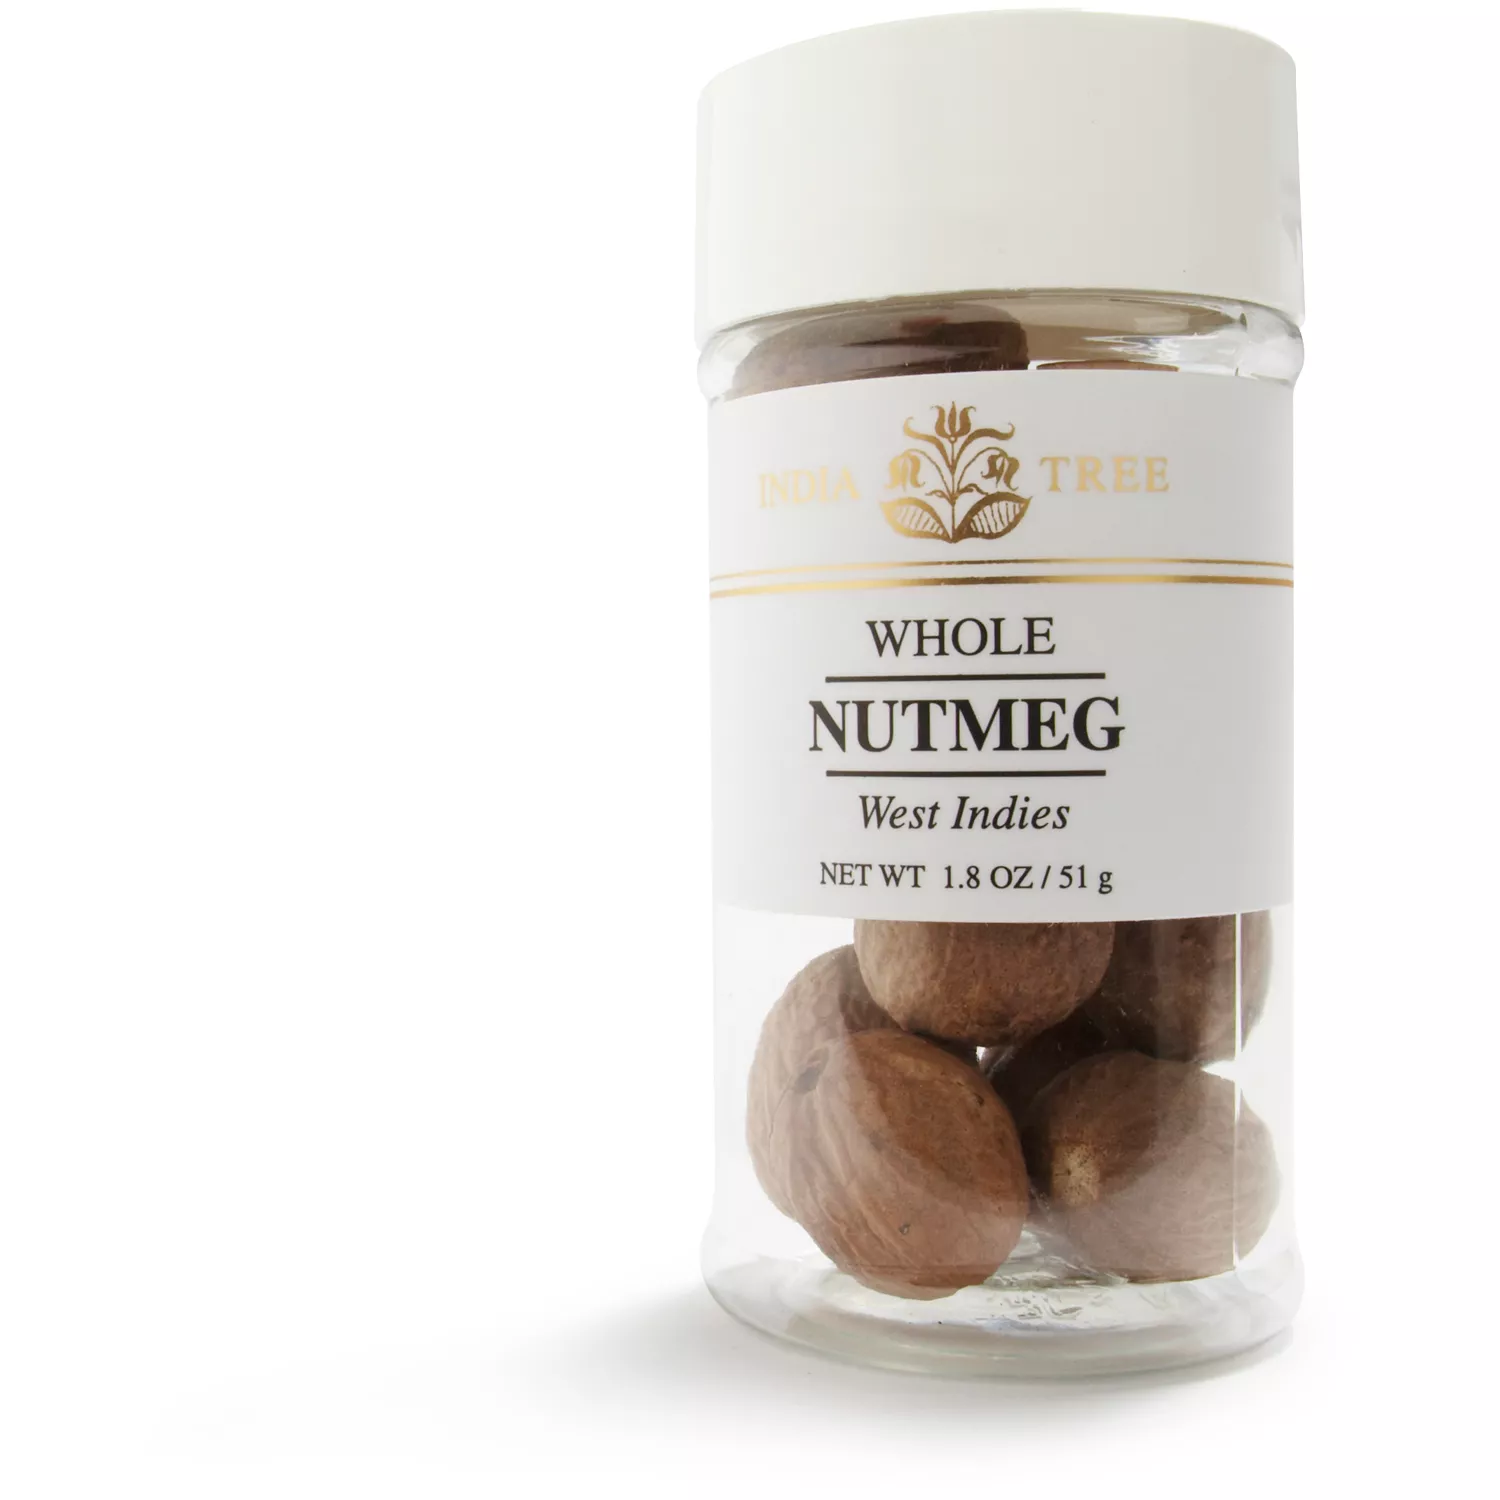 Nutmeg Essential Oil - It's More Than Just a Baking Ingredient